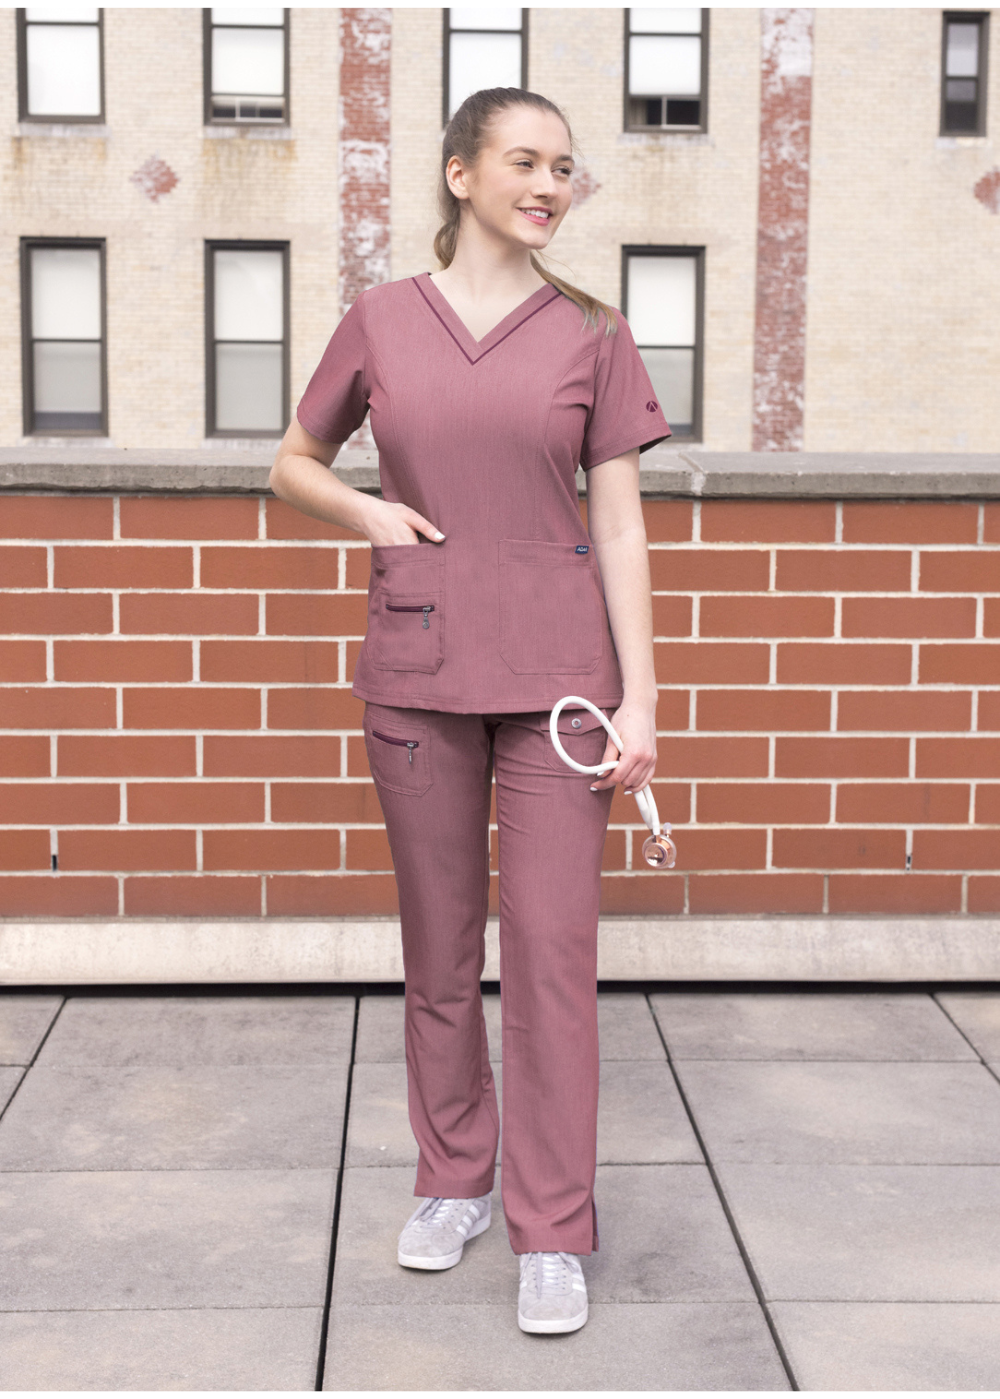 ADAR Elevated V-Neck Scrub Top w/ Zipper P4212 ( paired with #4100 pant or #7104 jogger)